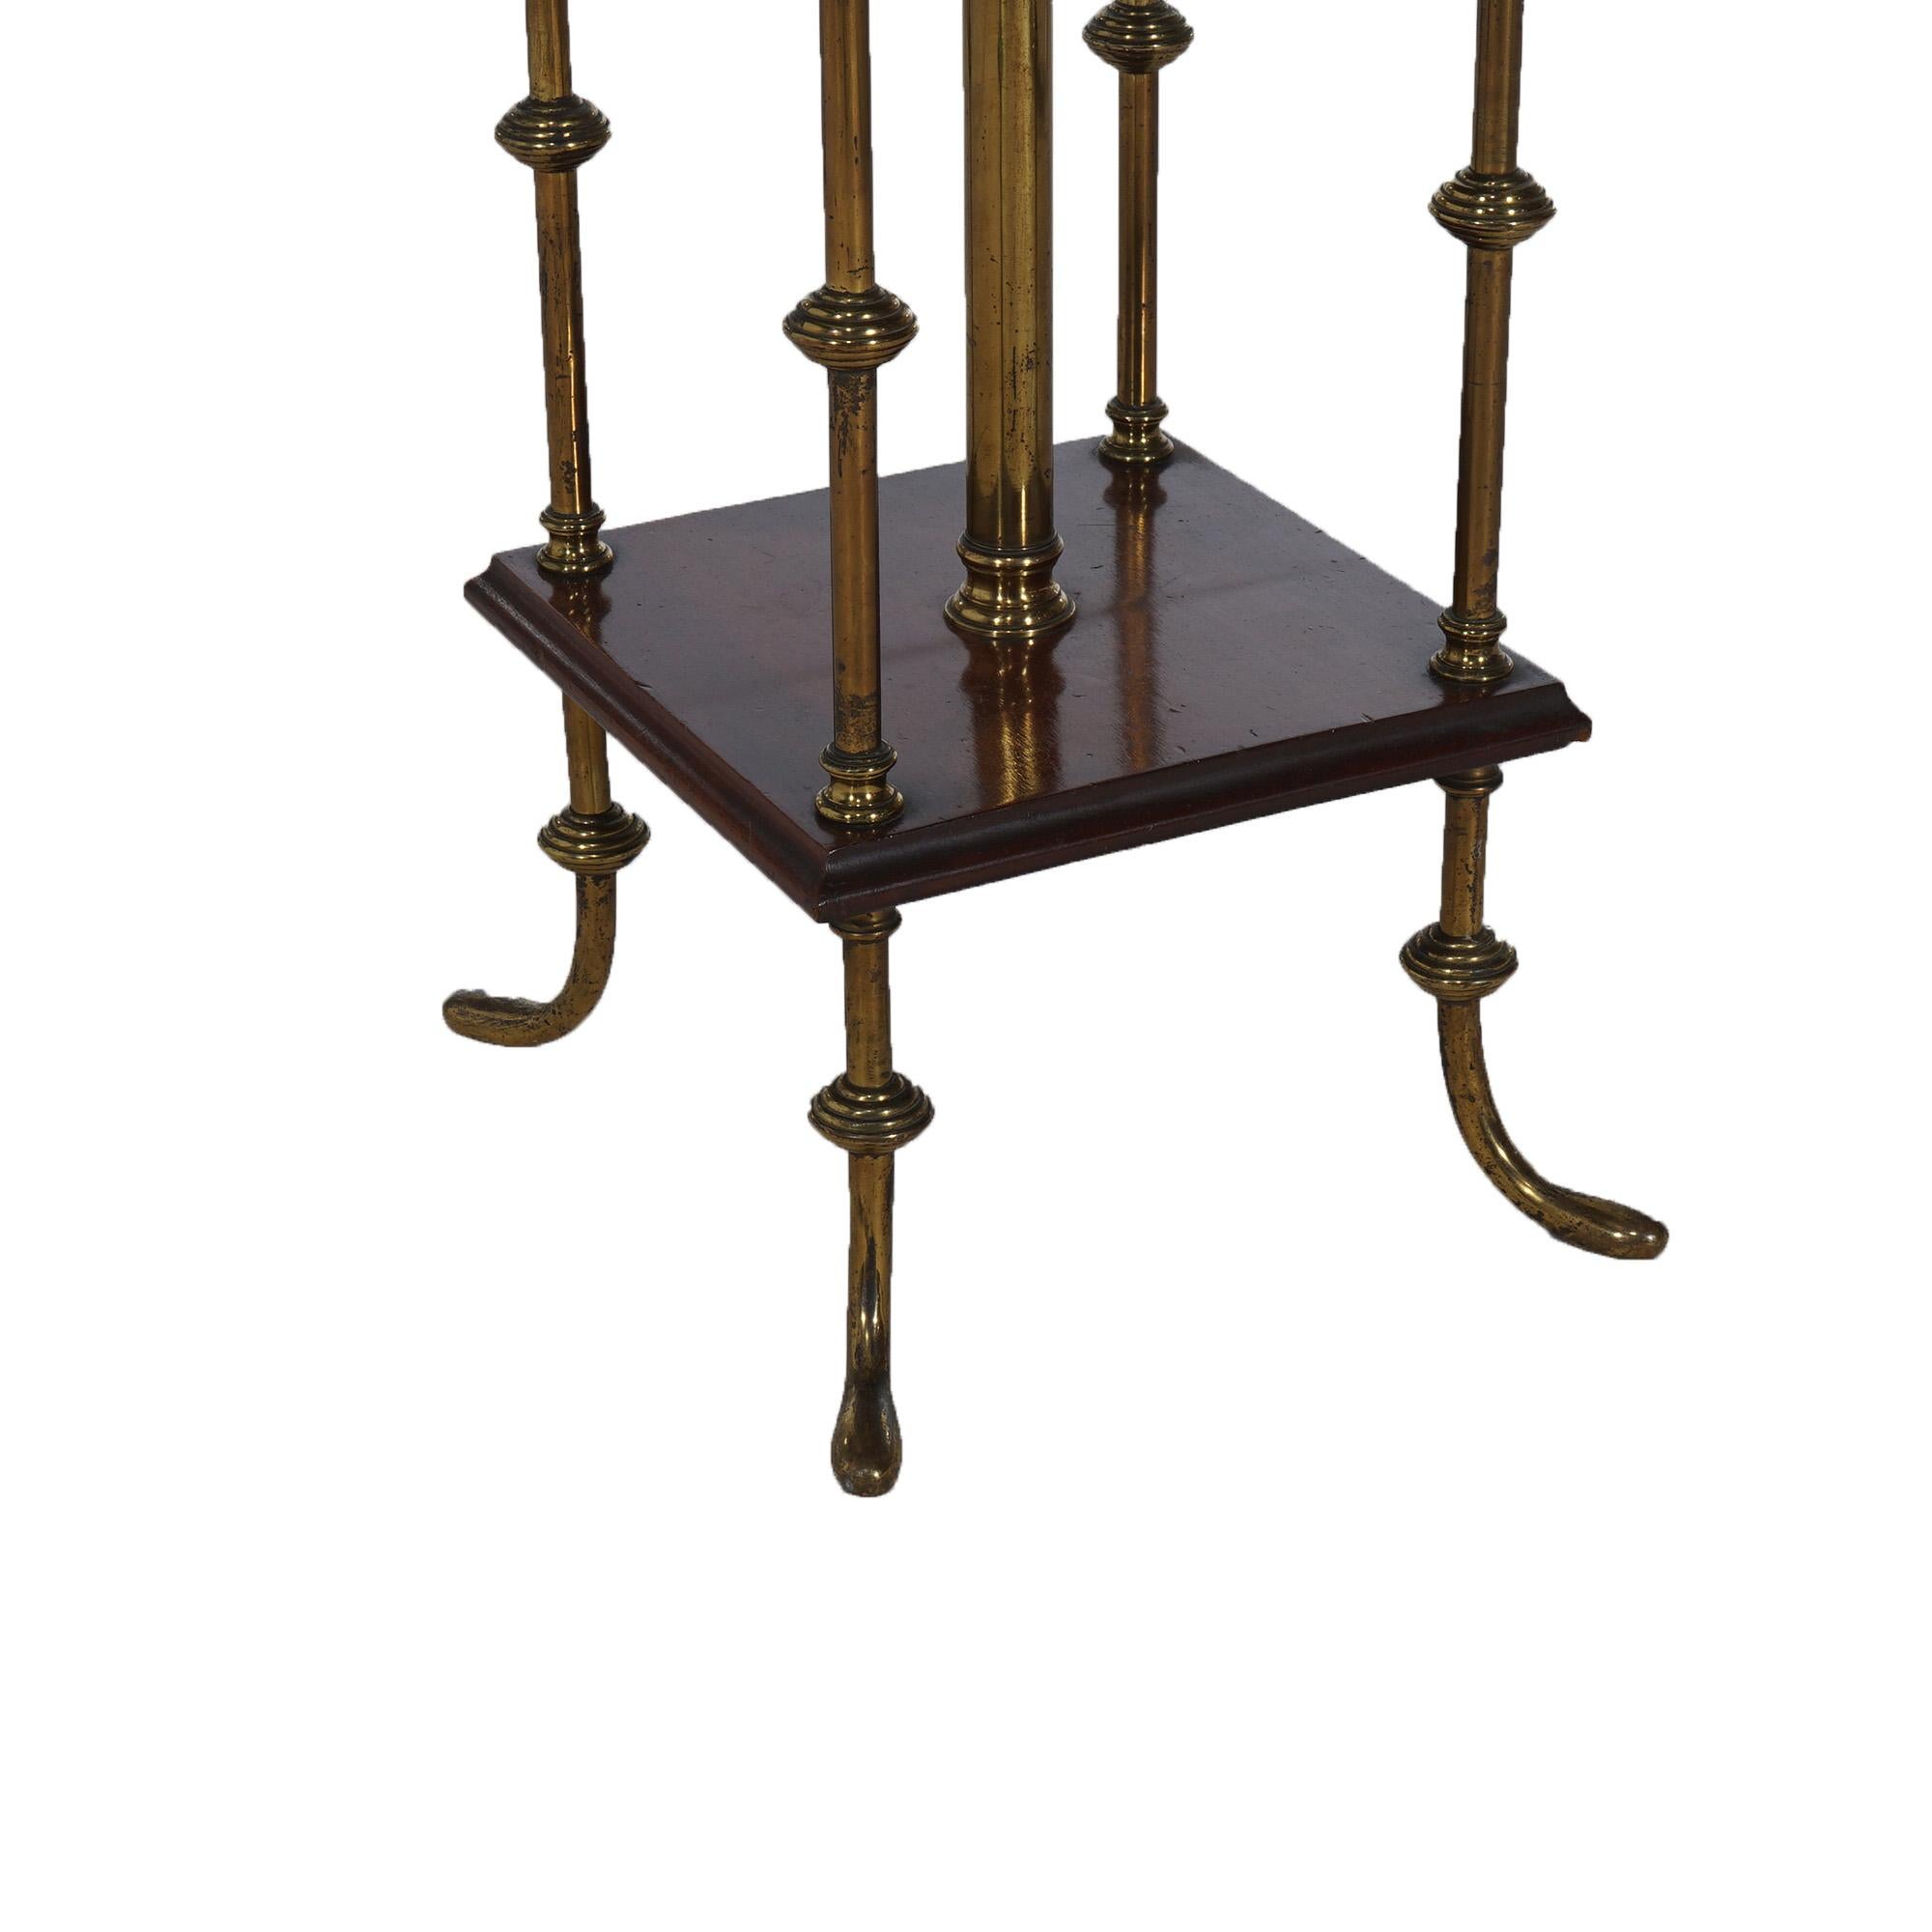 American Antique Neoclassical Mahogany & Brass Piano Floor Lamp c1890 For Sale